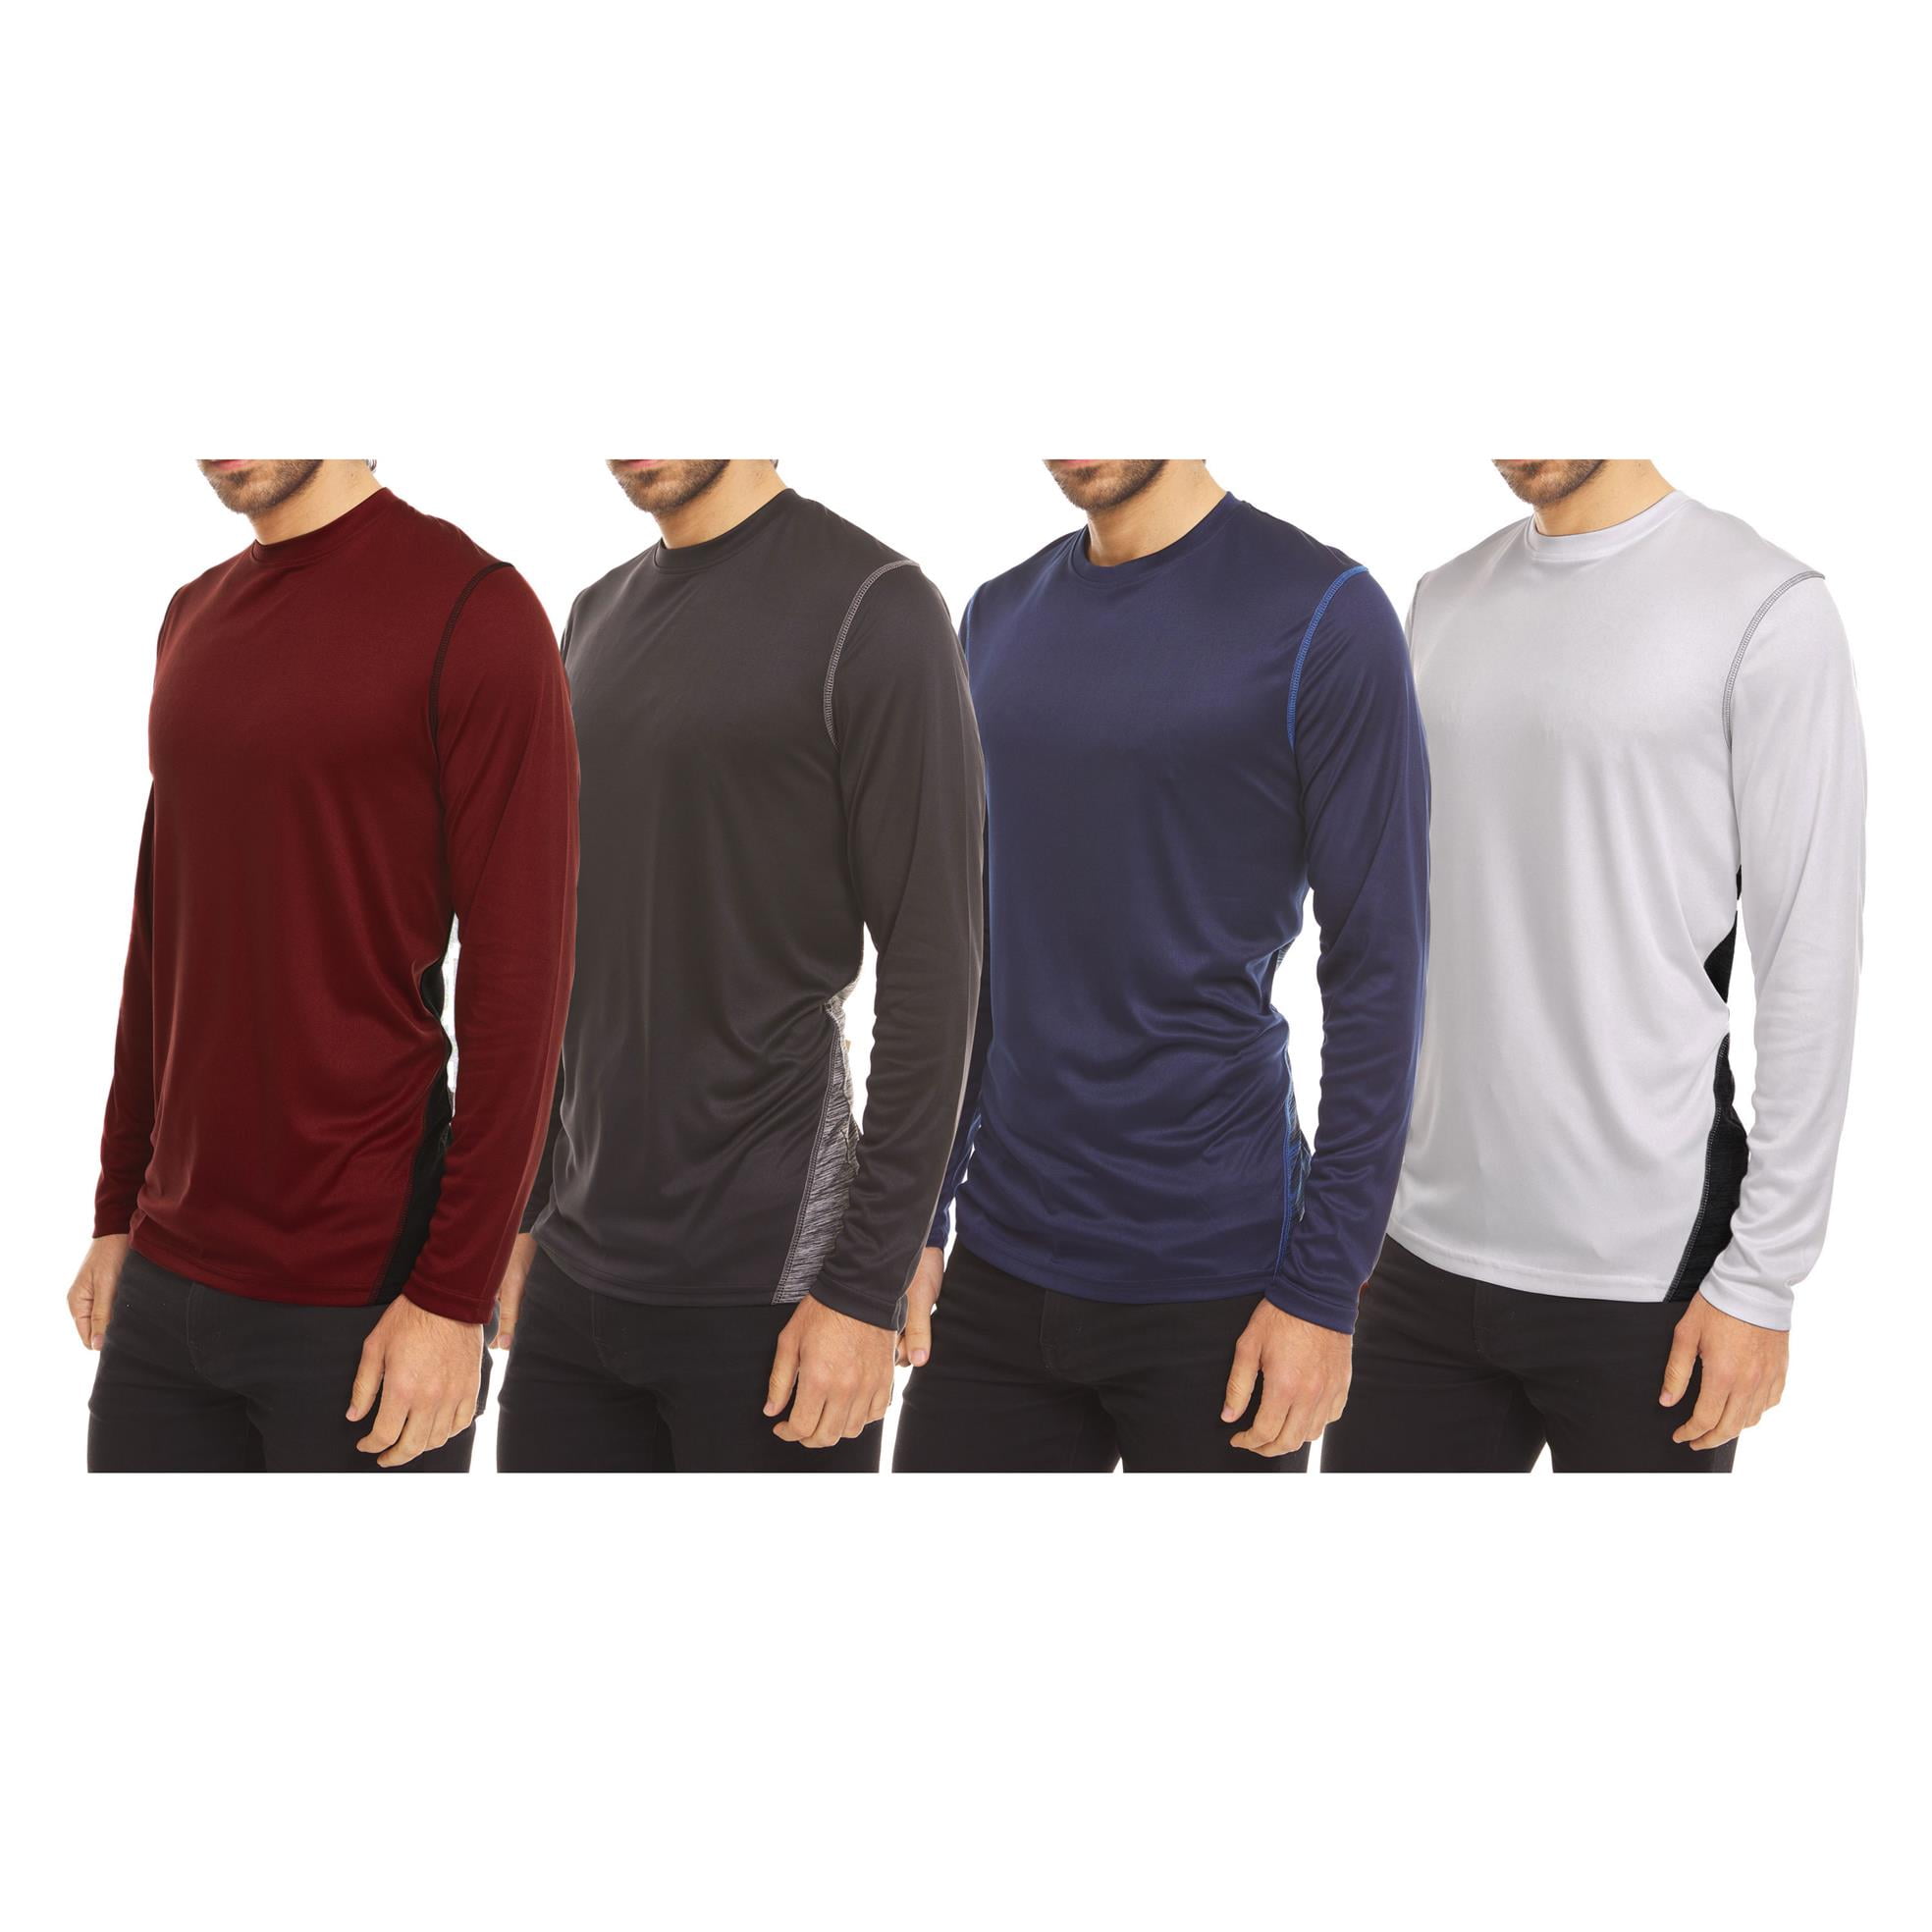 Dri-Fit Long Sleeve T Shirts for Men-4 Pack- Moisture Wicking, Quick ...